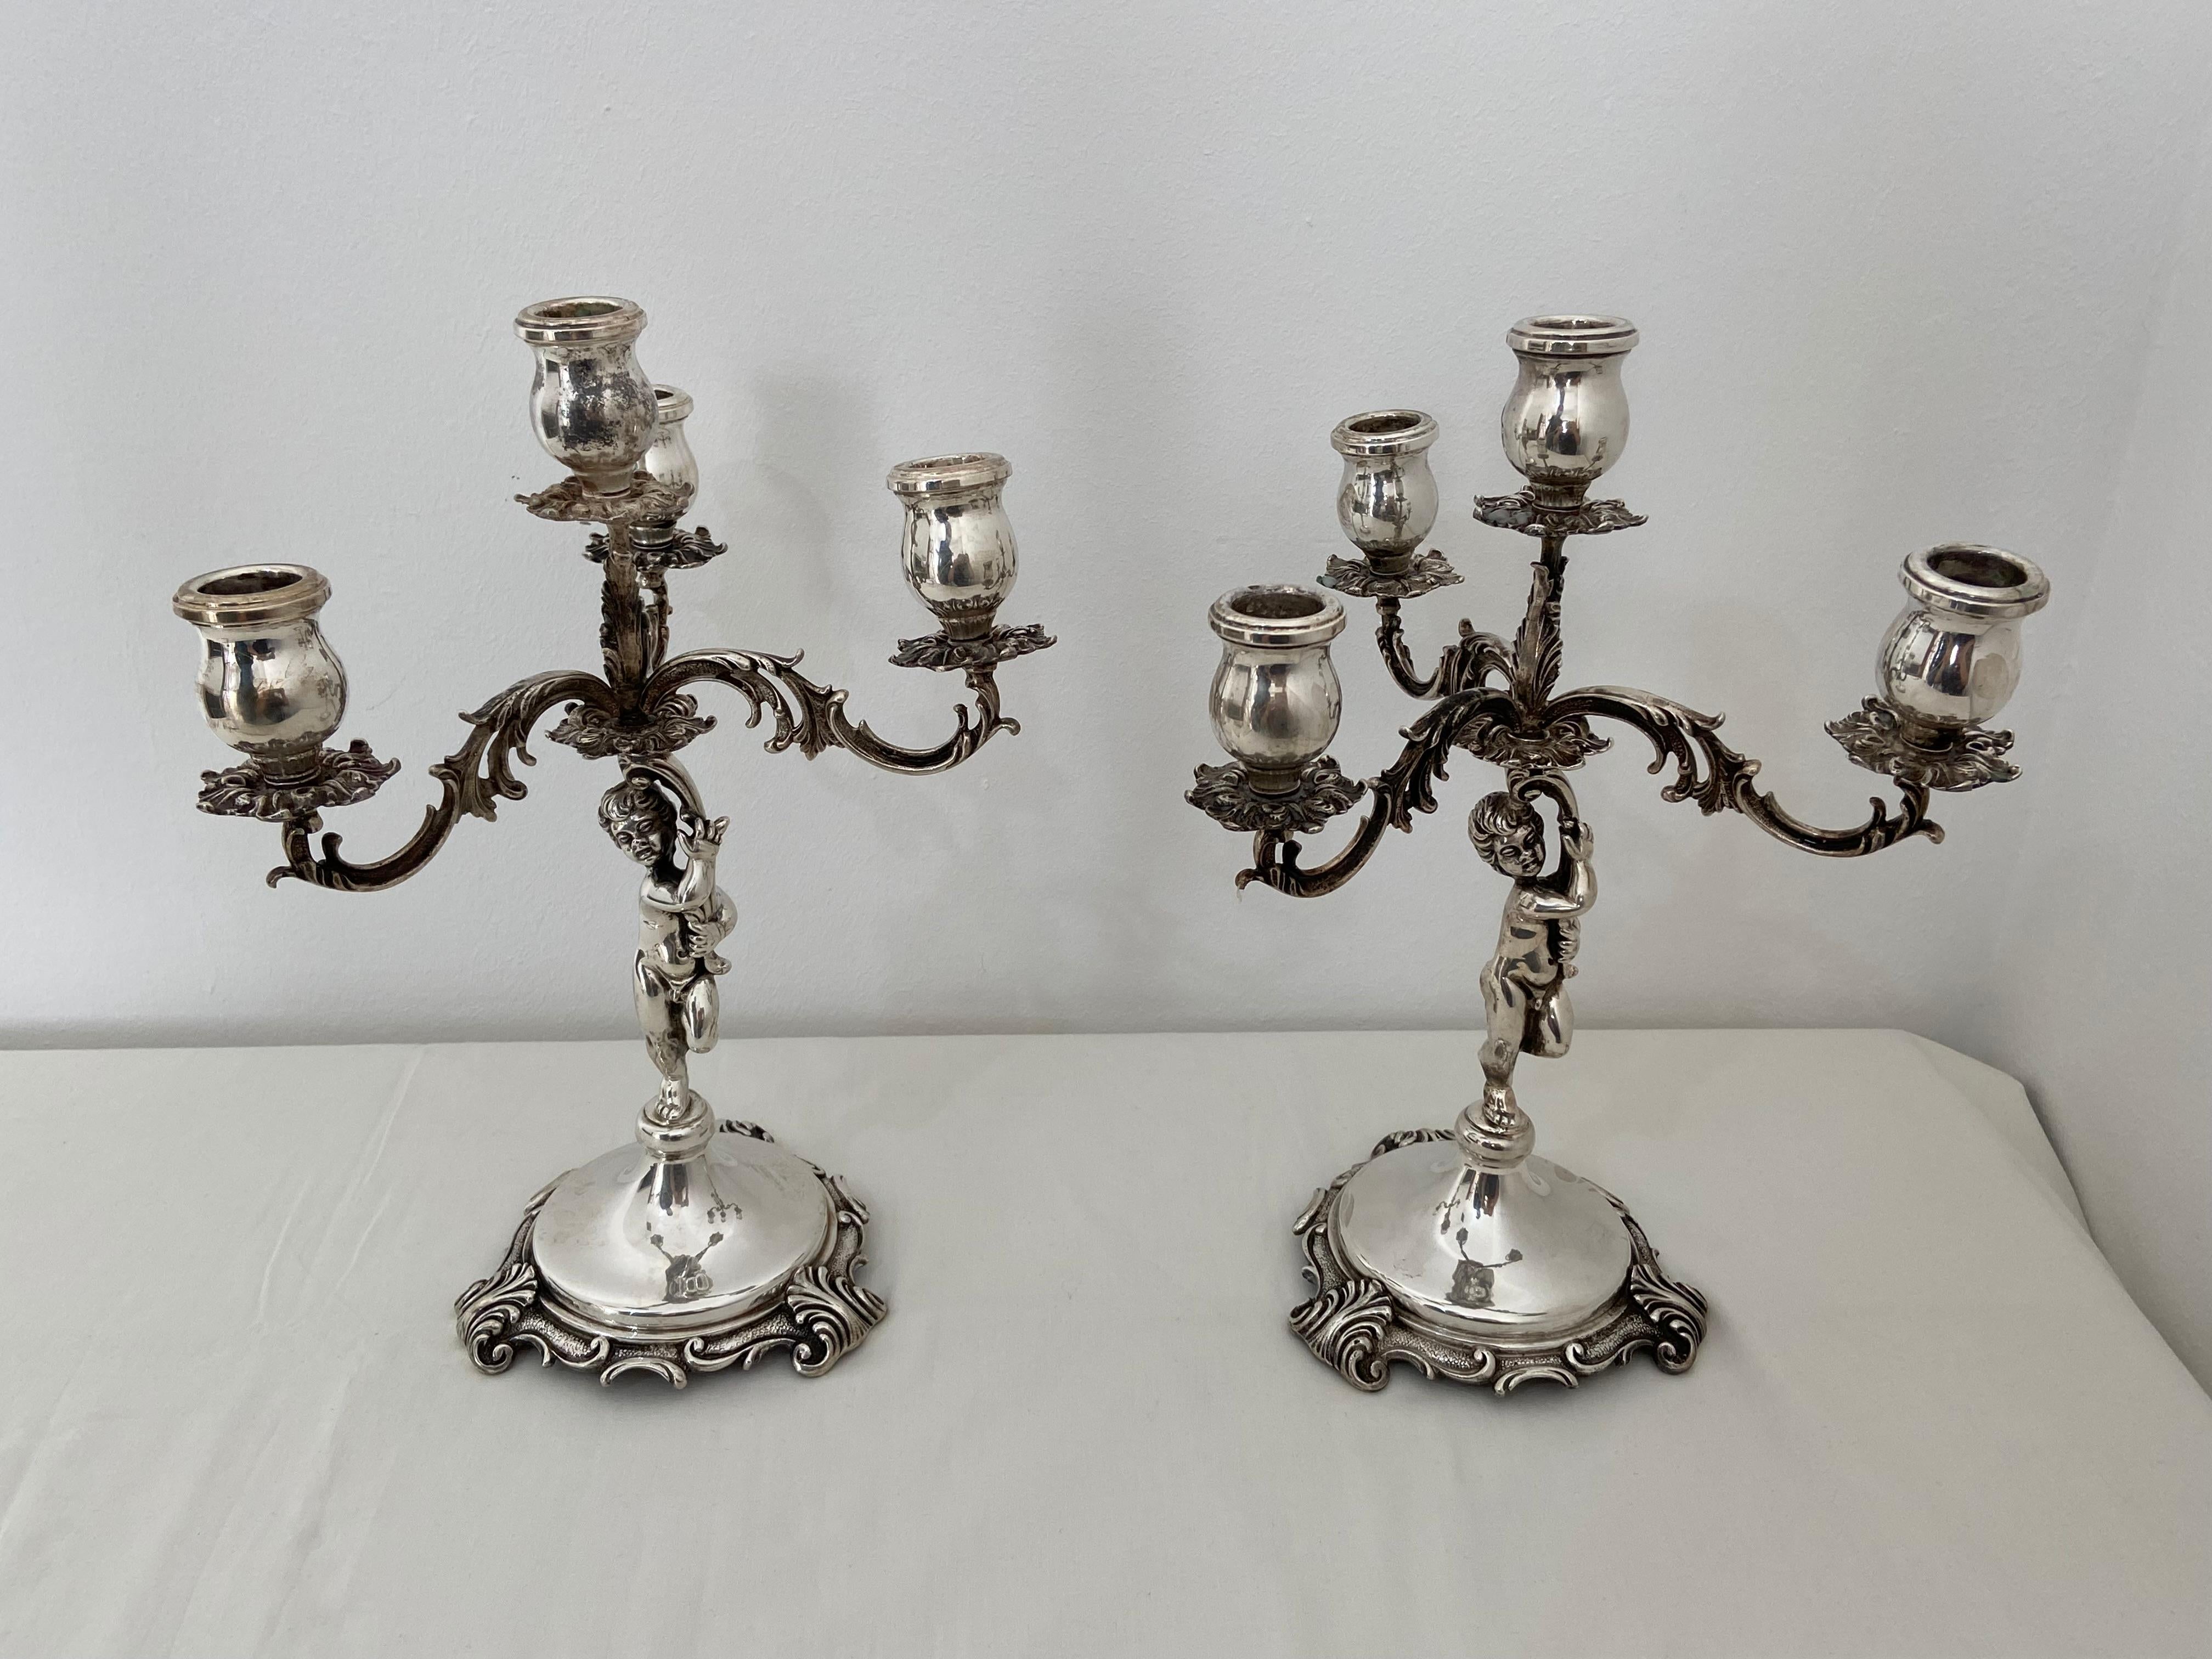 Two Handcrafted Candelabra in 800 Silver, Works of Art For Sale 2